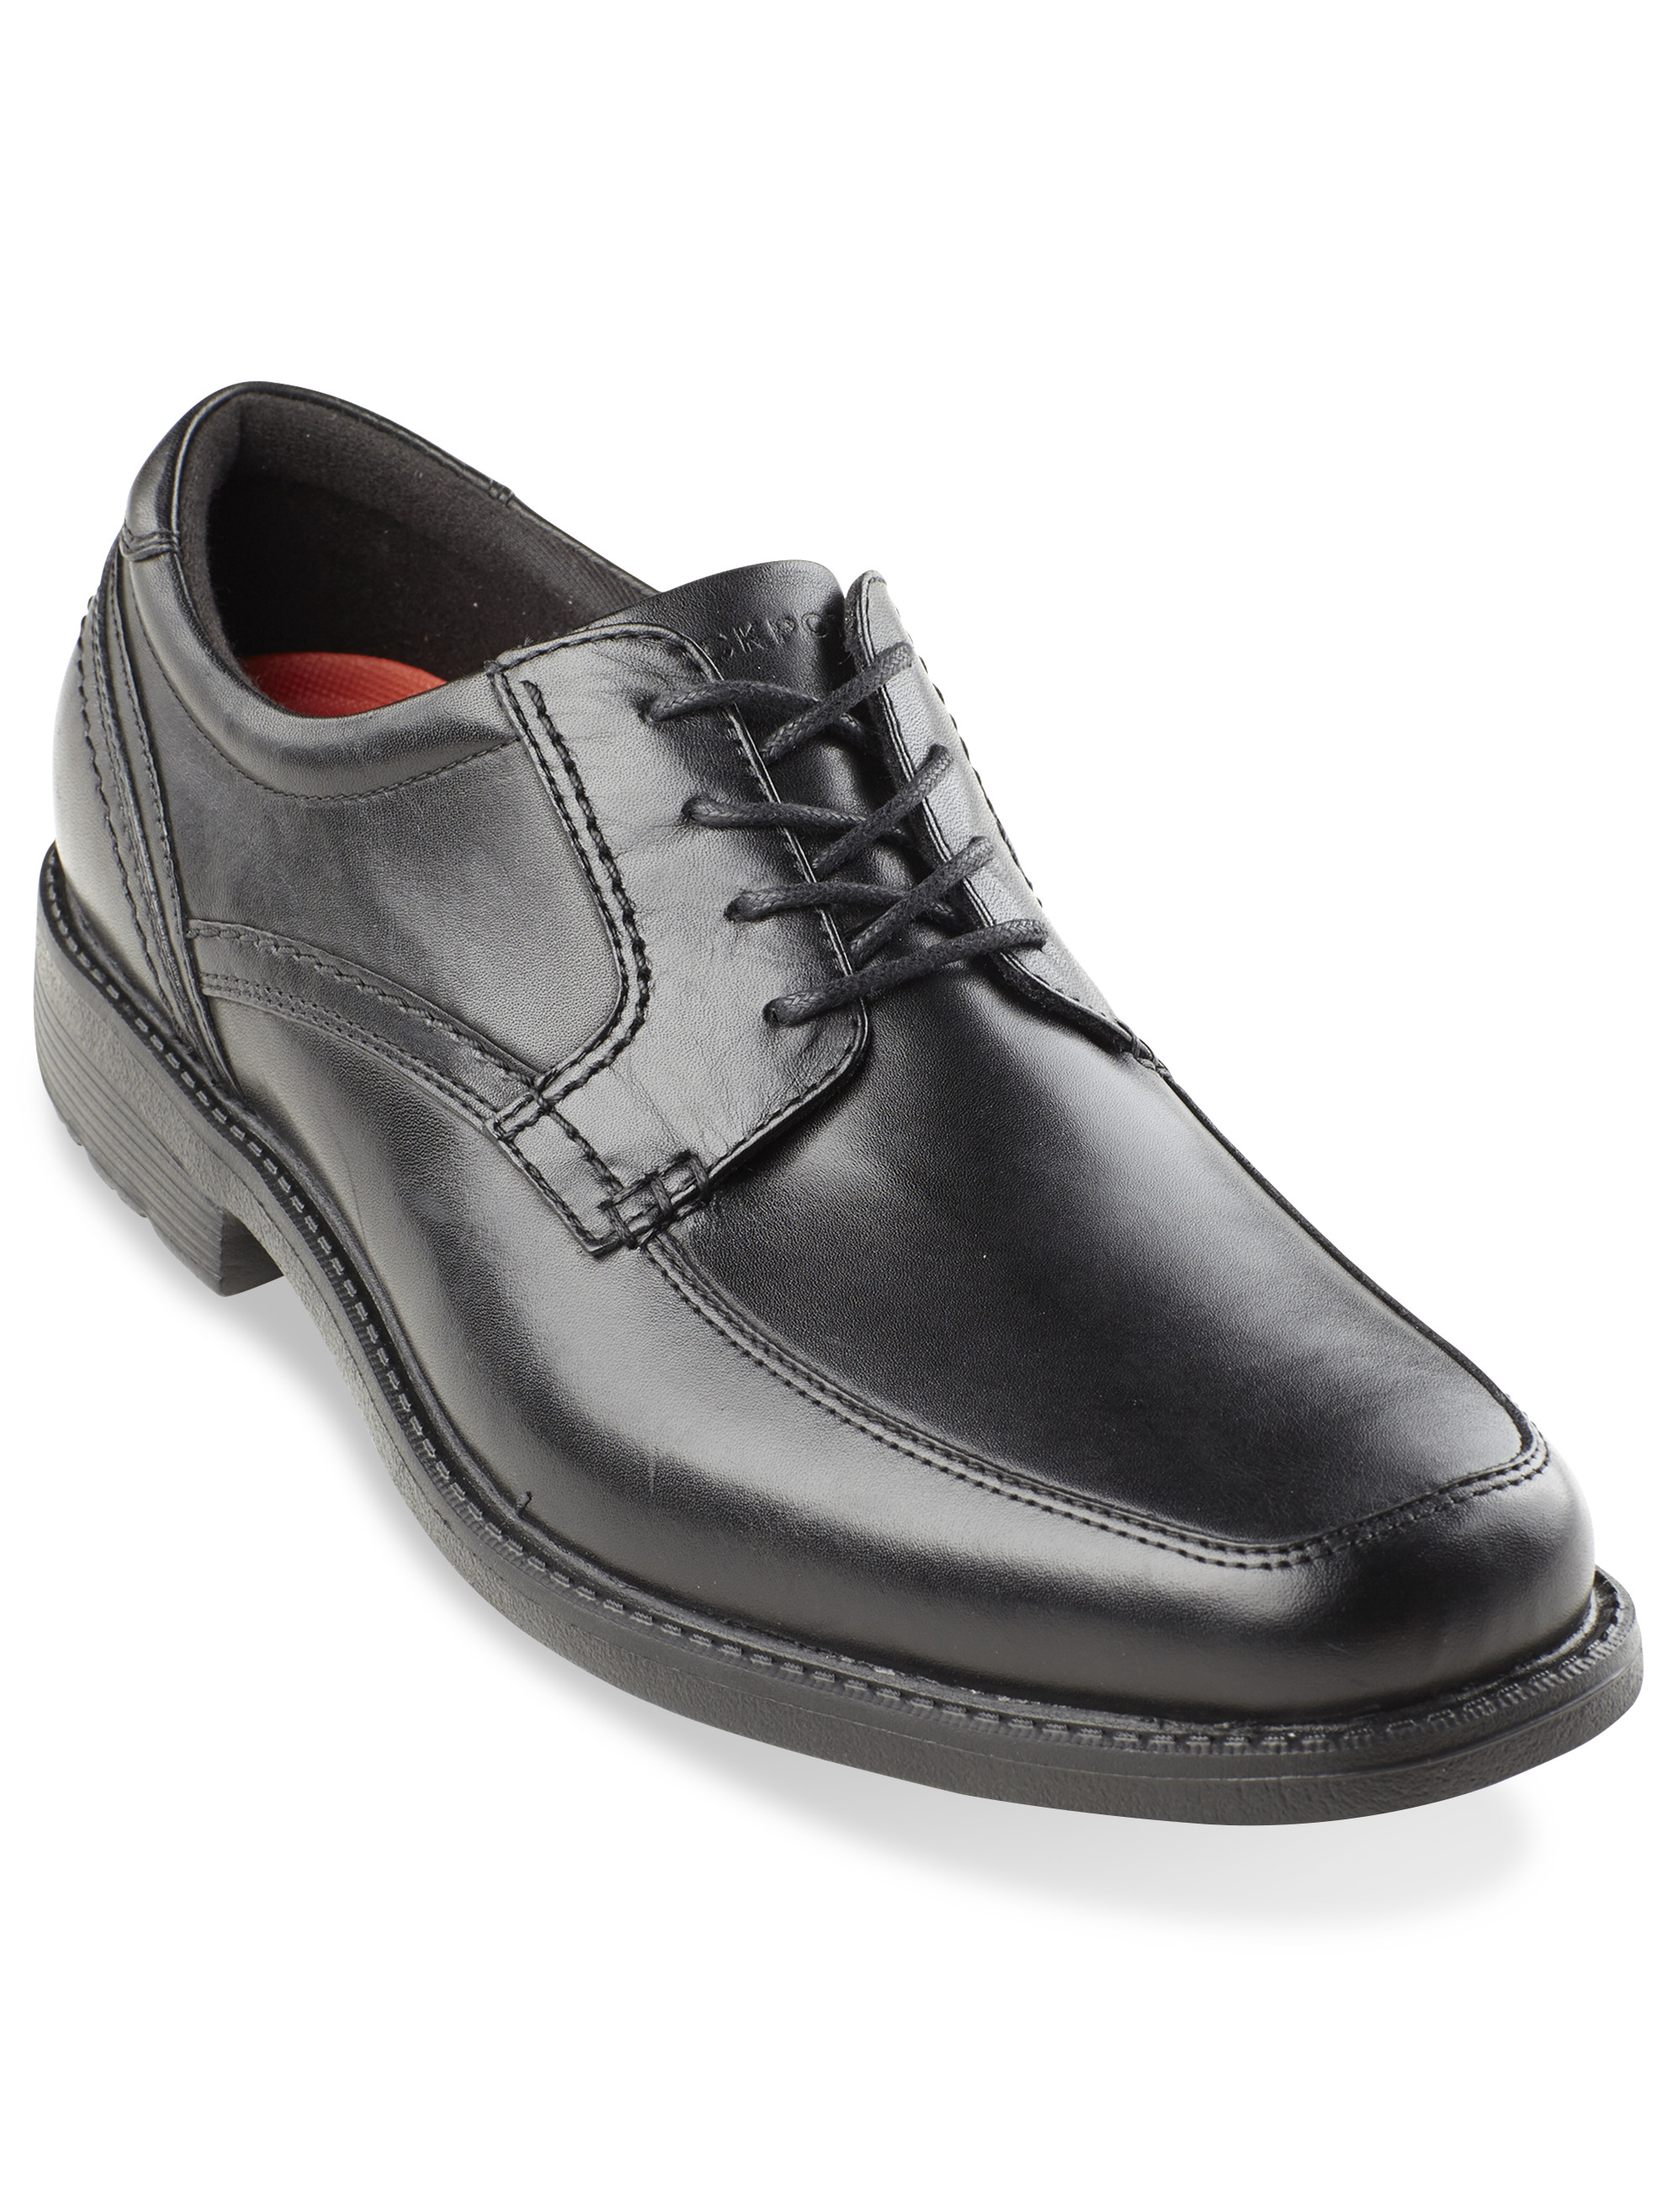 Shine On in Men's Extra Wide Dress Shoes